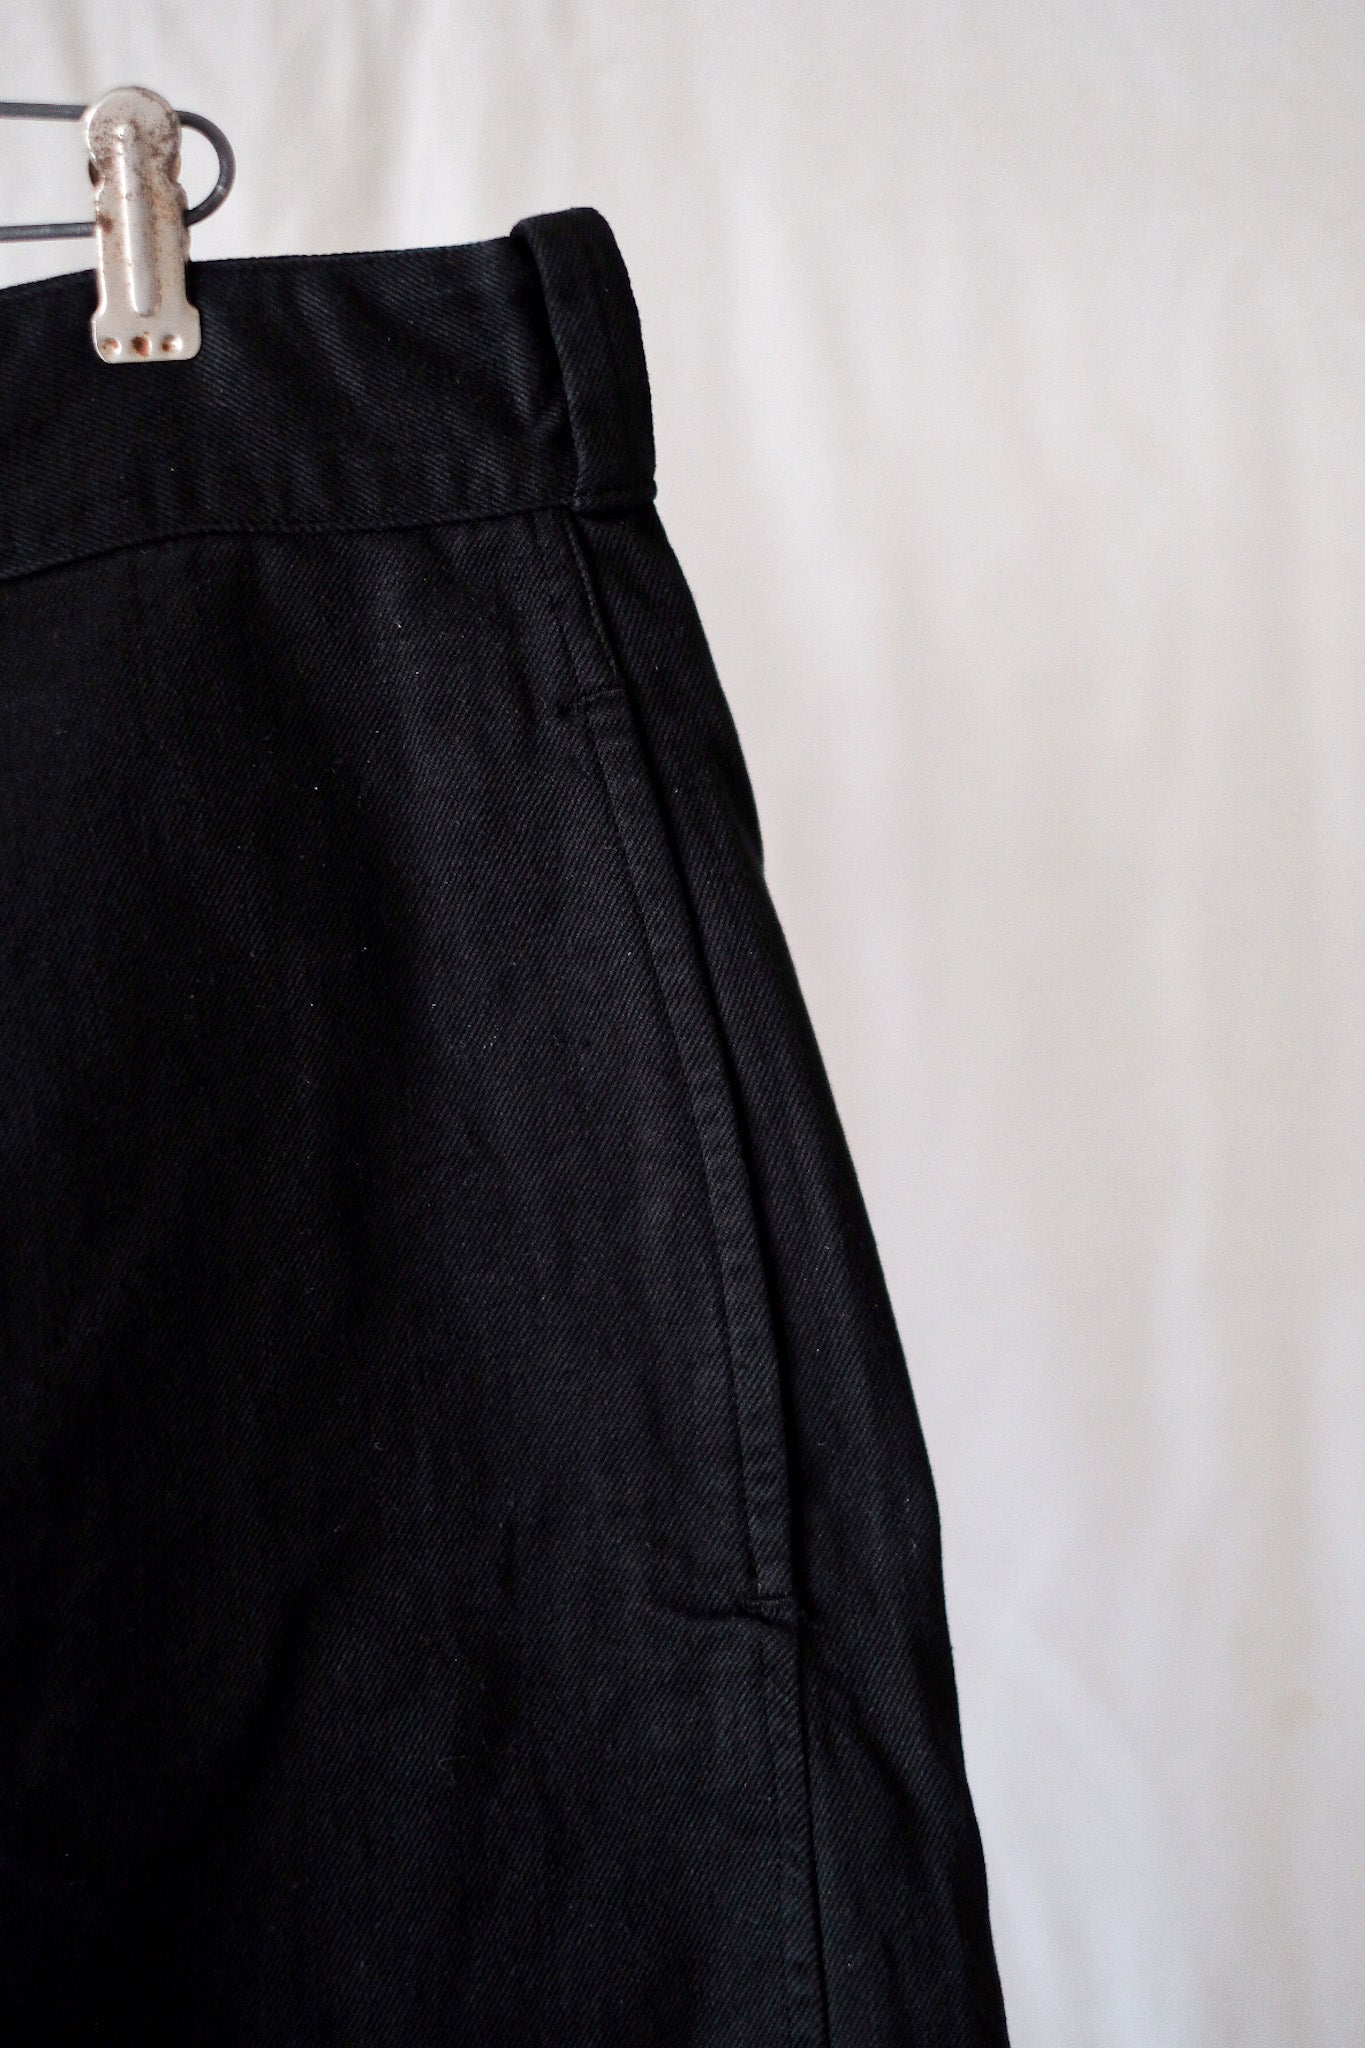 [~ 60's] French Army M52 Chino Shorts taille.5 "Black Overdye"